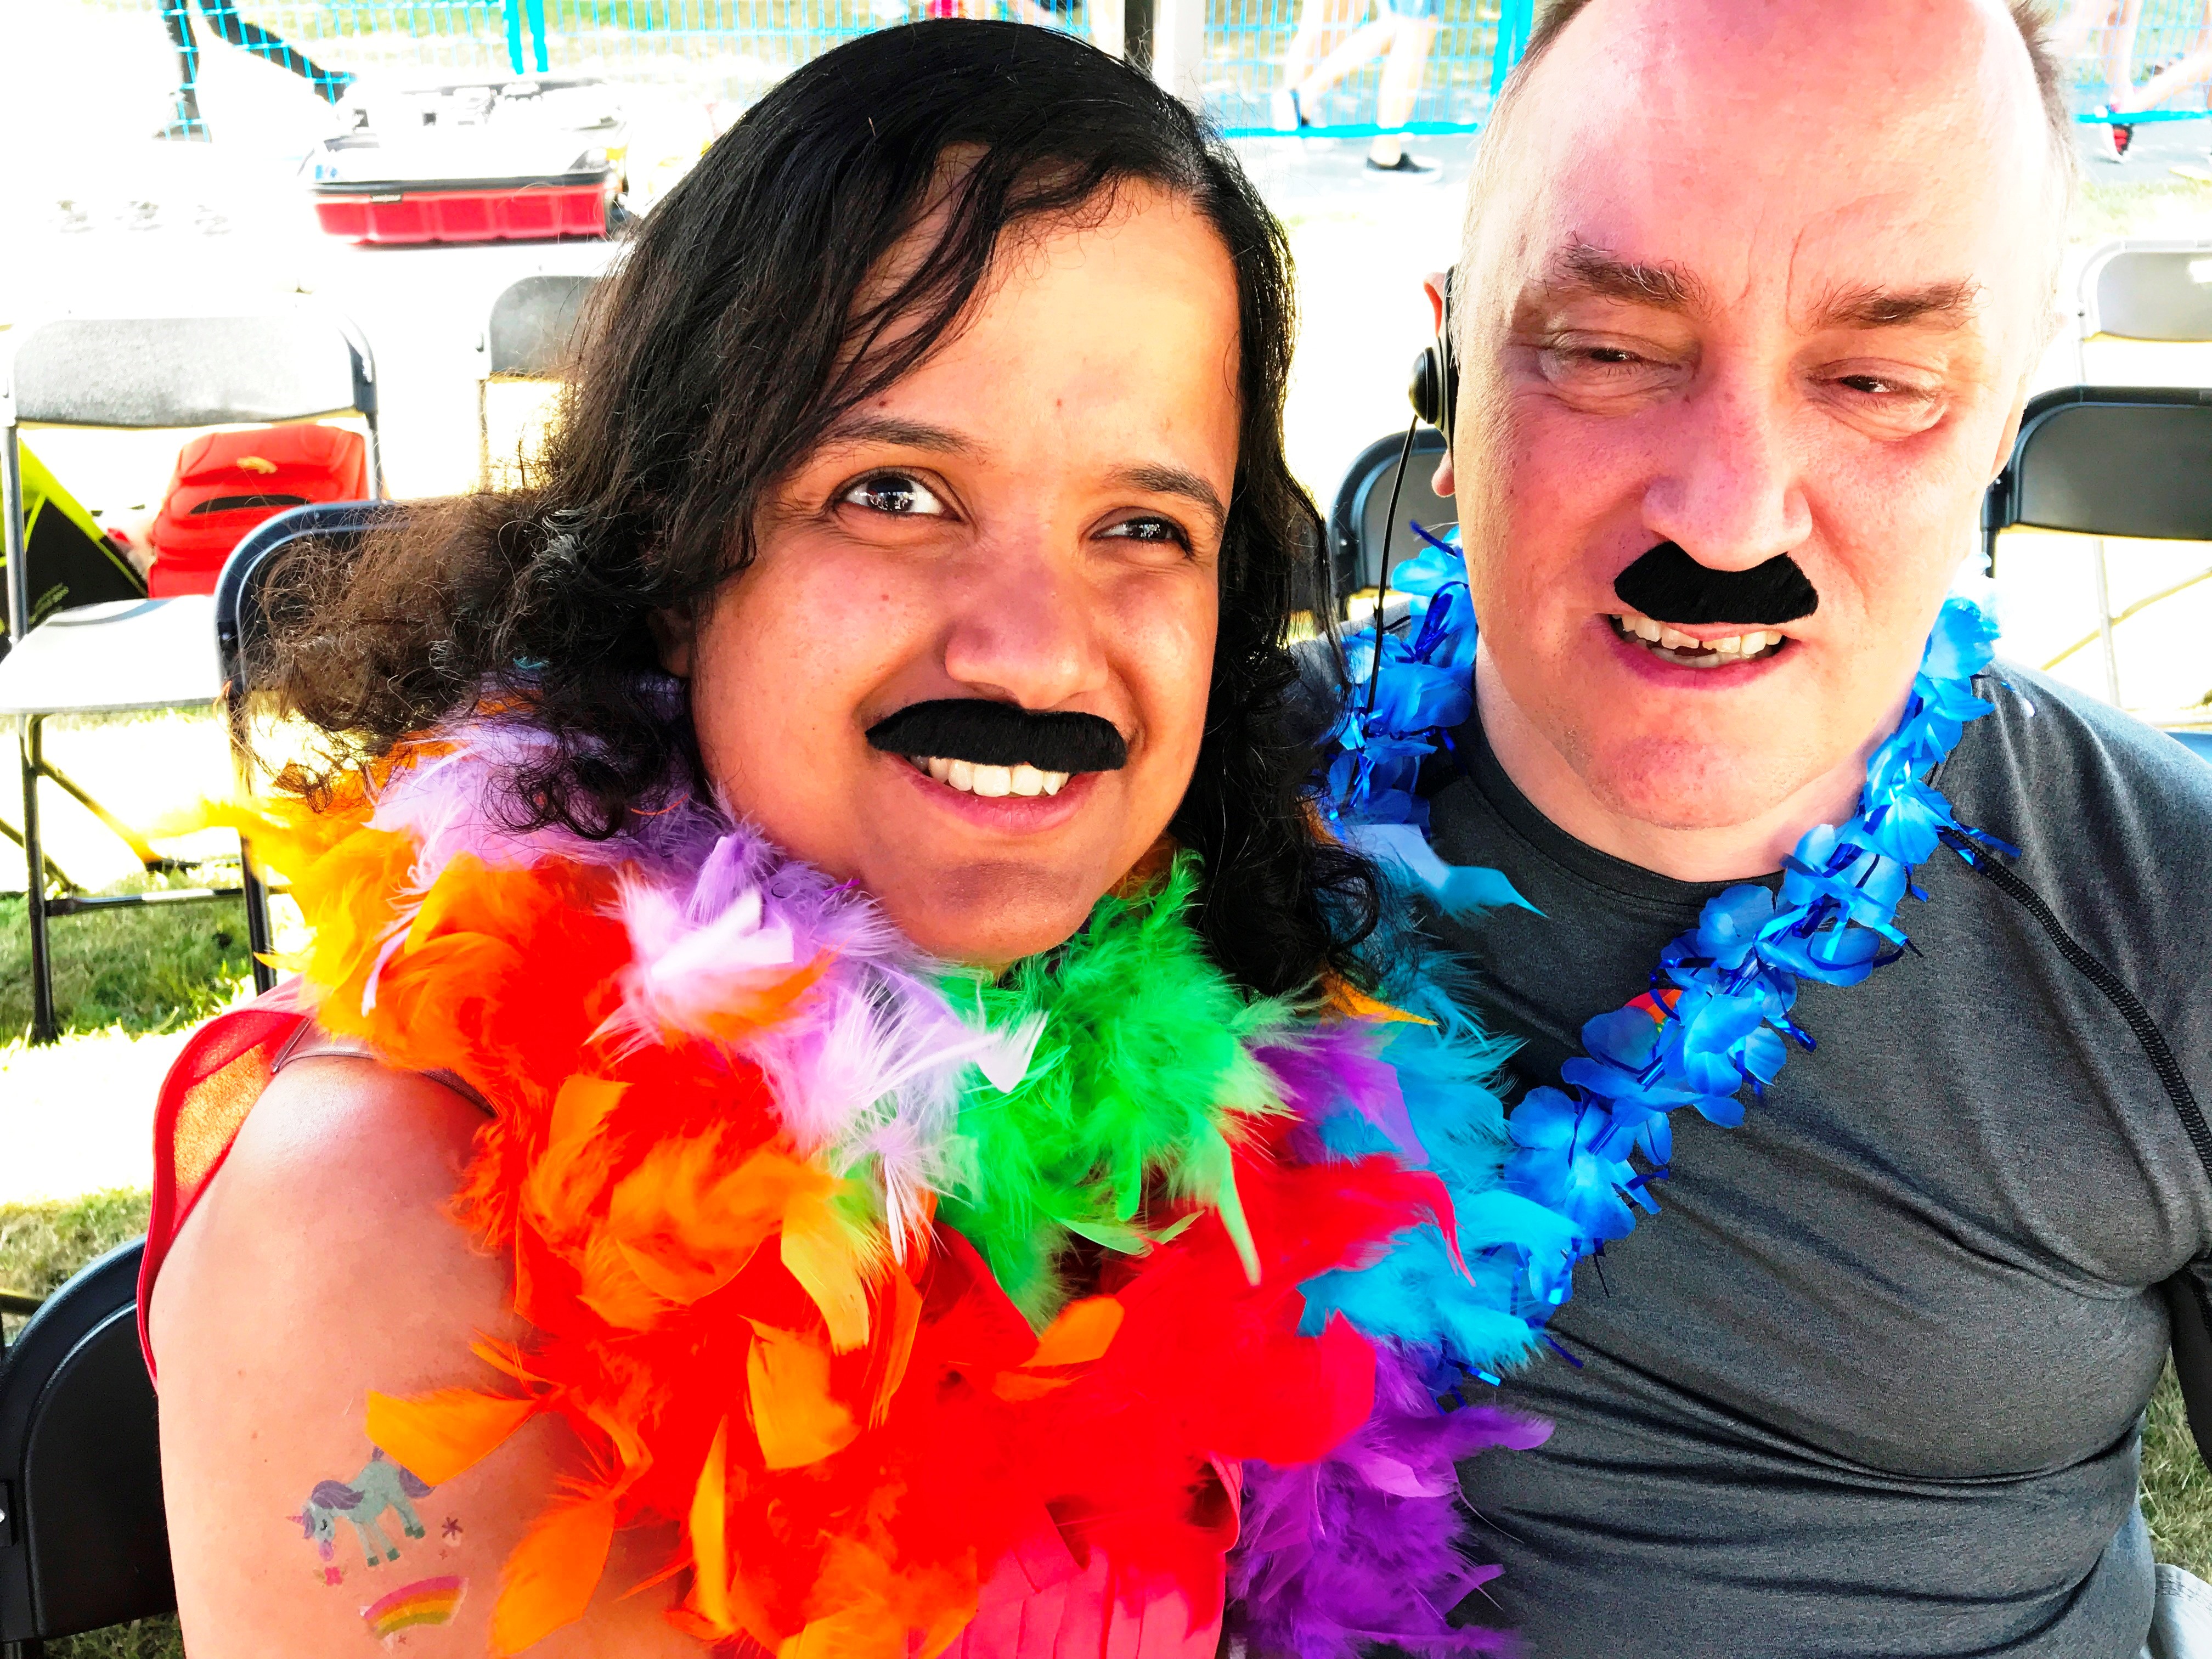 Kristy and Shawn, wearing fake mustaches and rainbow boas, under the Accessibility Tent at the Pride Parade